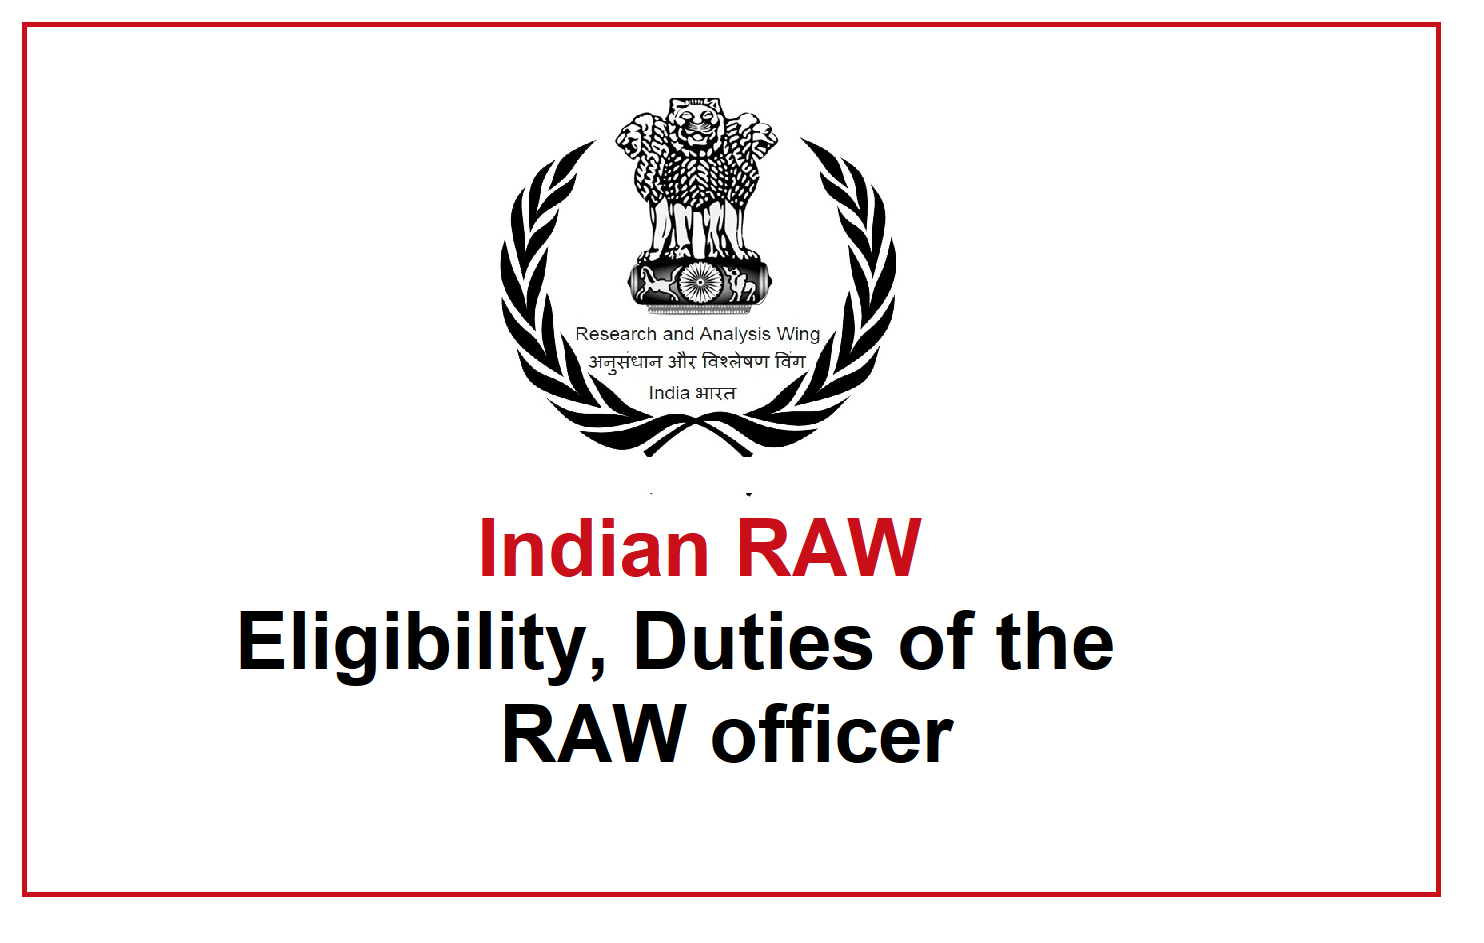 INDIAN RAW & IB, Duties of a RAW Officer